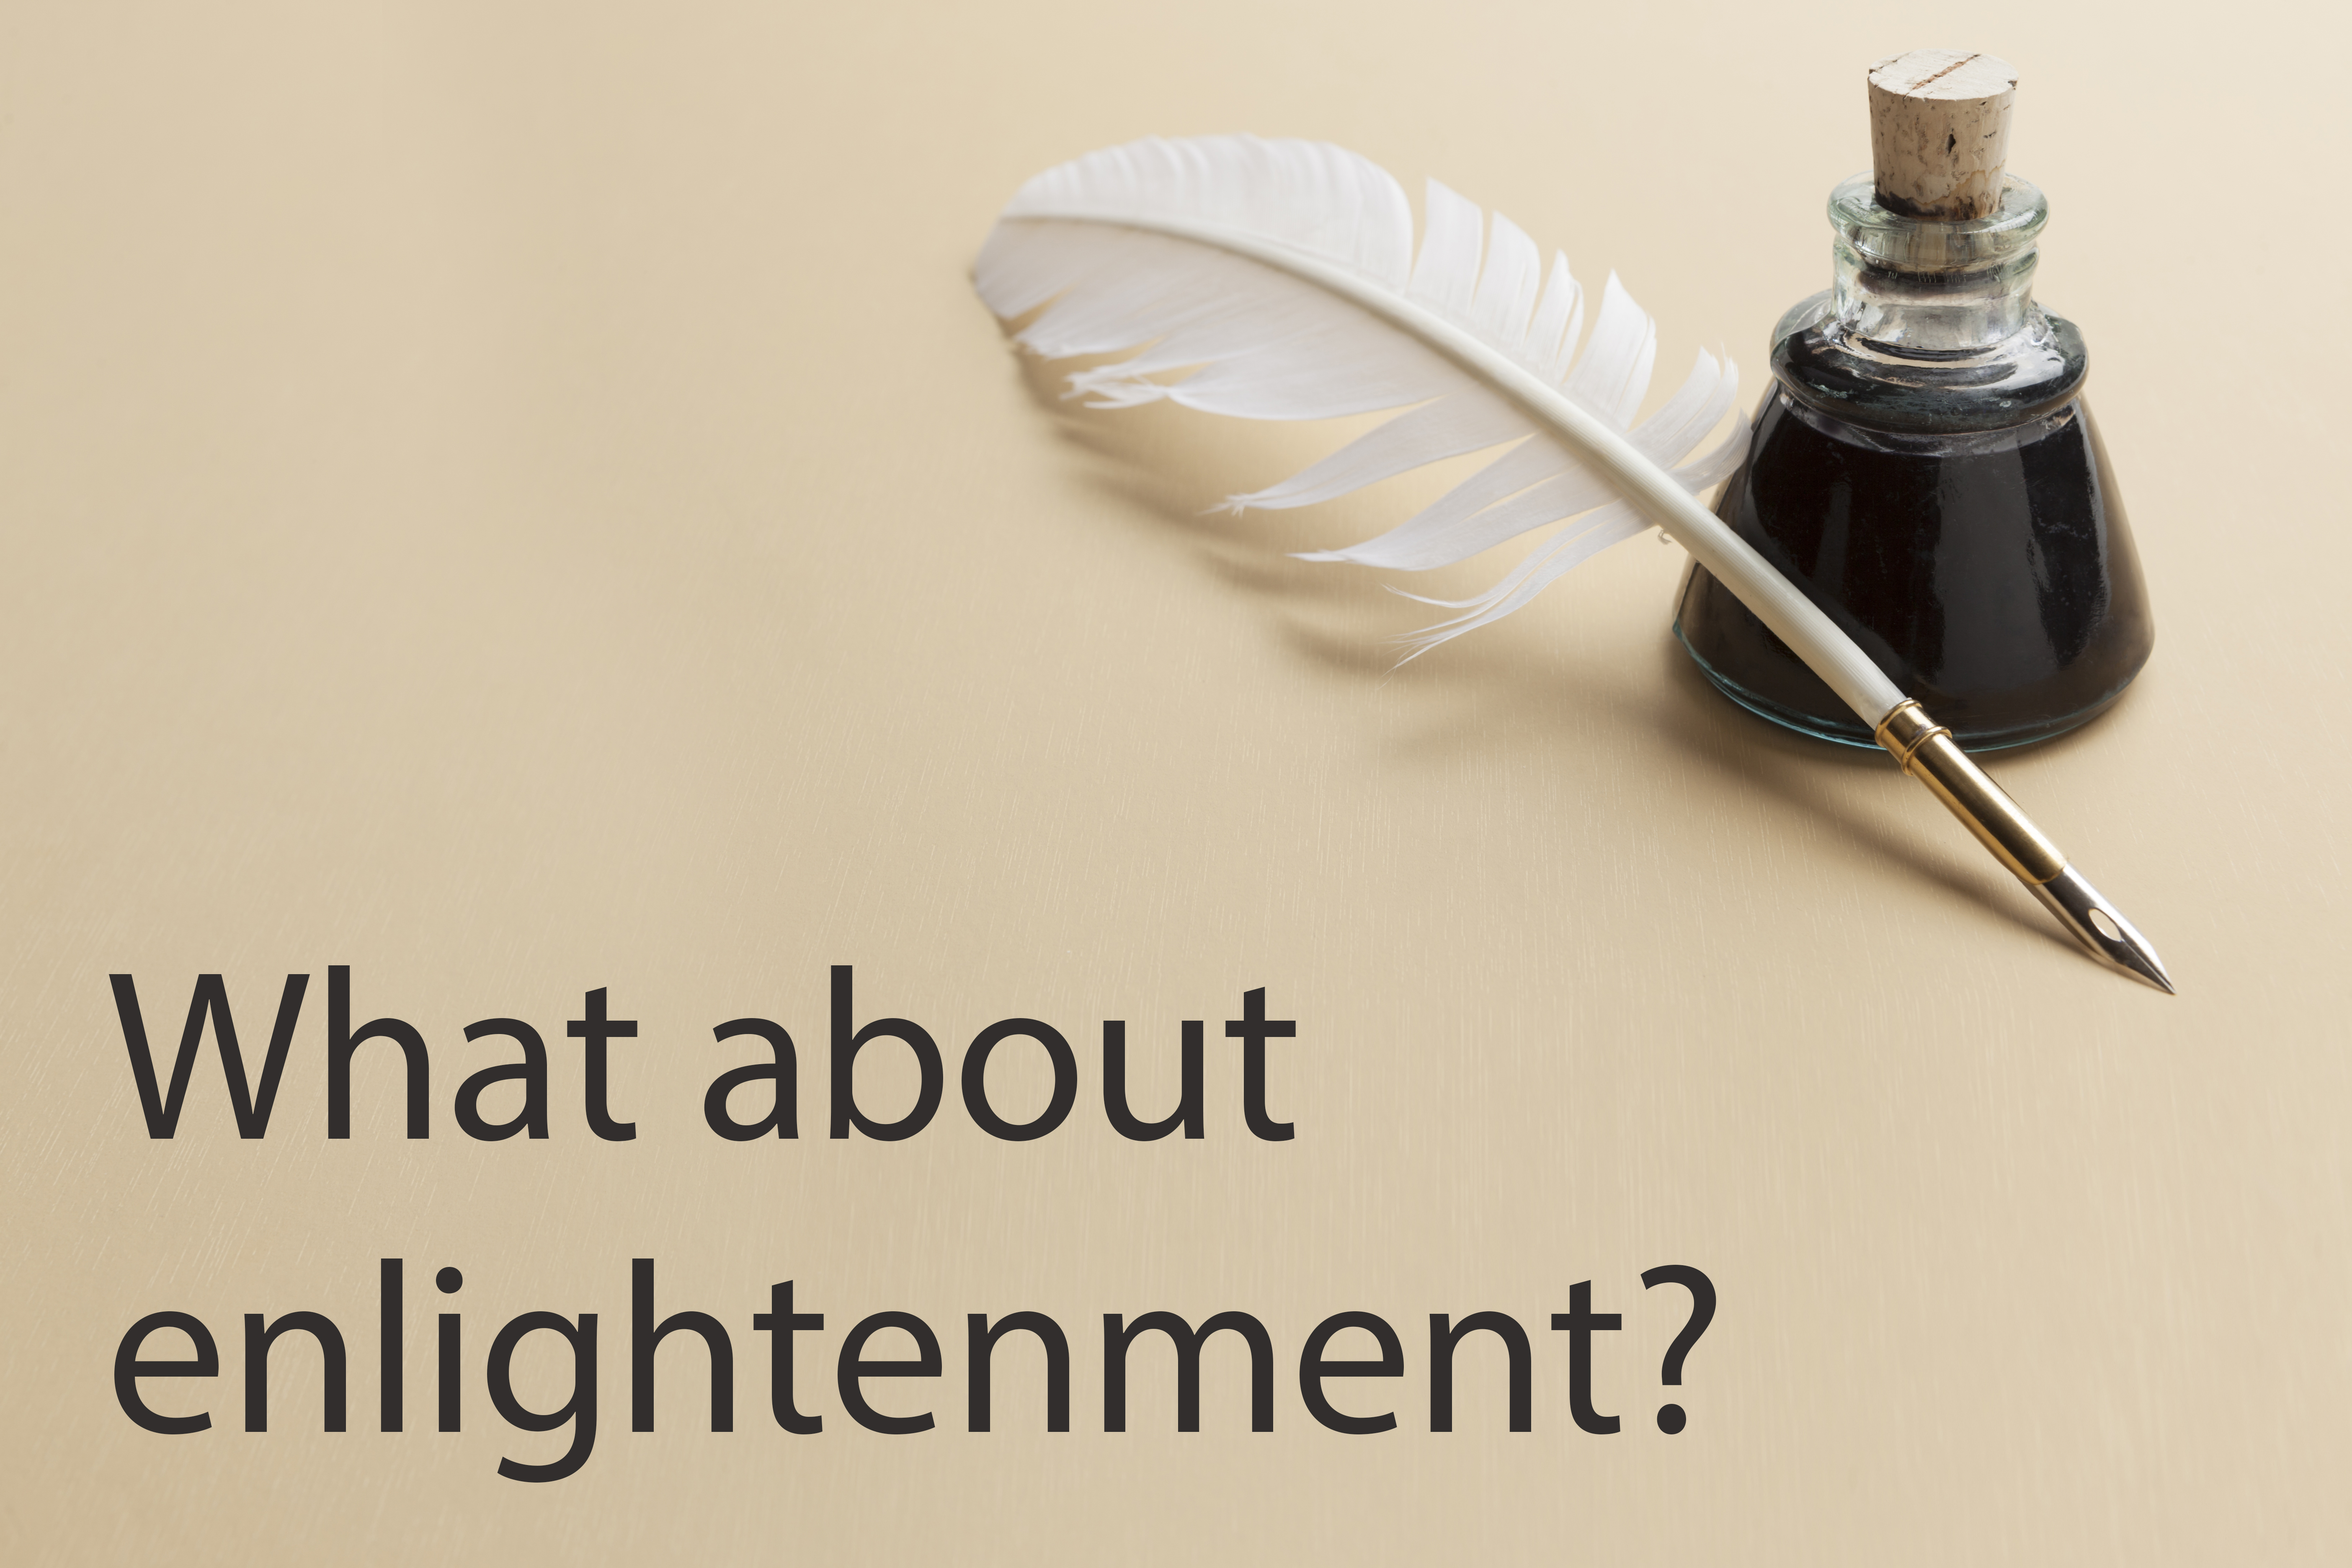 What about enlightenment?